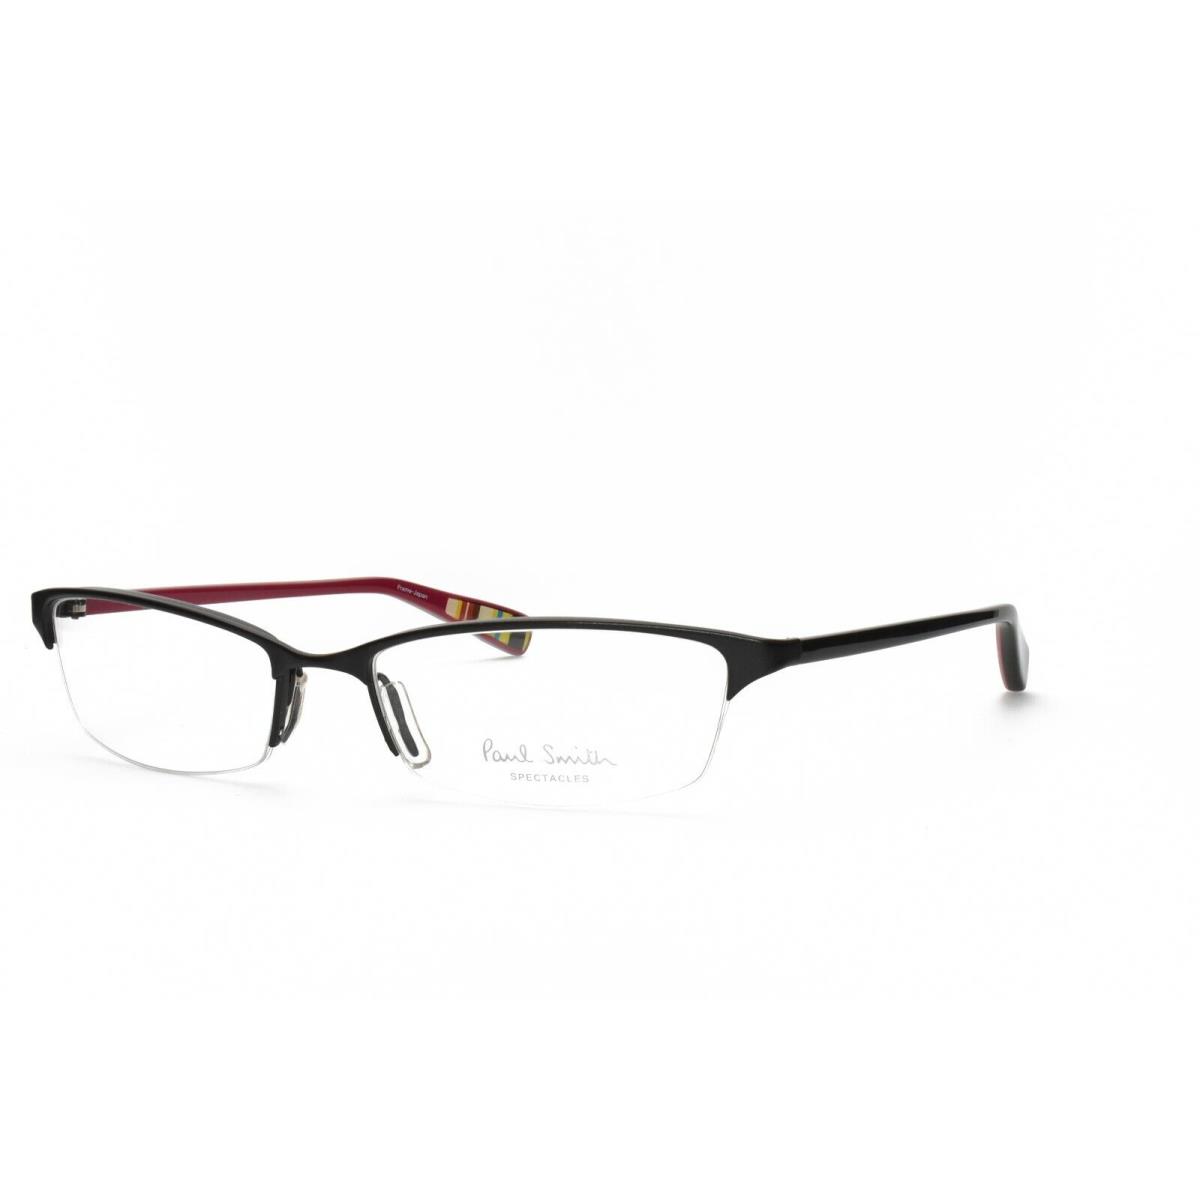 Paul Smith PS 186 OX Eyeglasses Frames Only 53-17-130